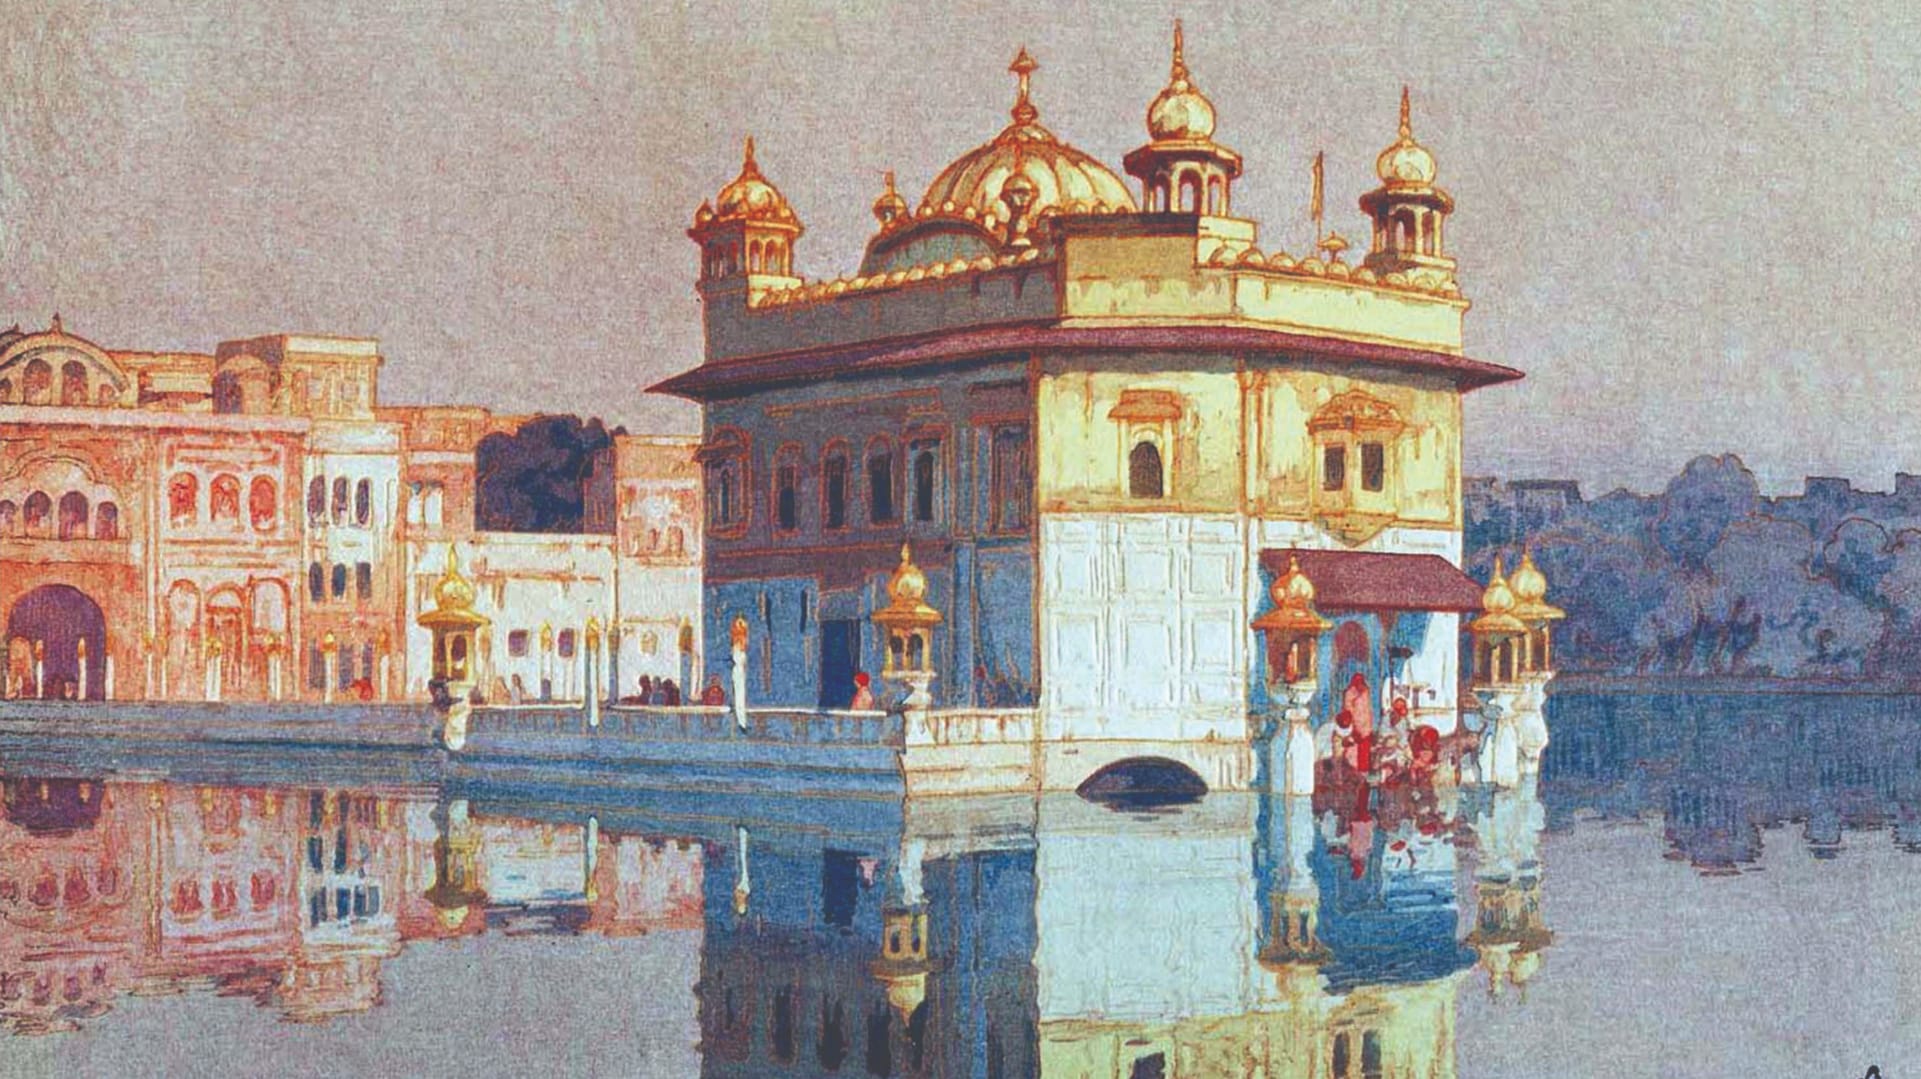 The Sikh: An Occidental Romance — Depictions of the community through a colonial lens